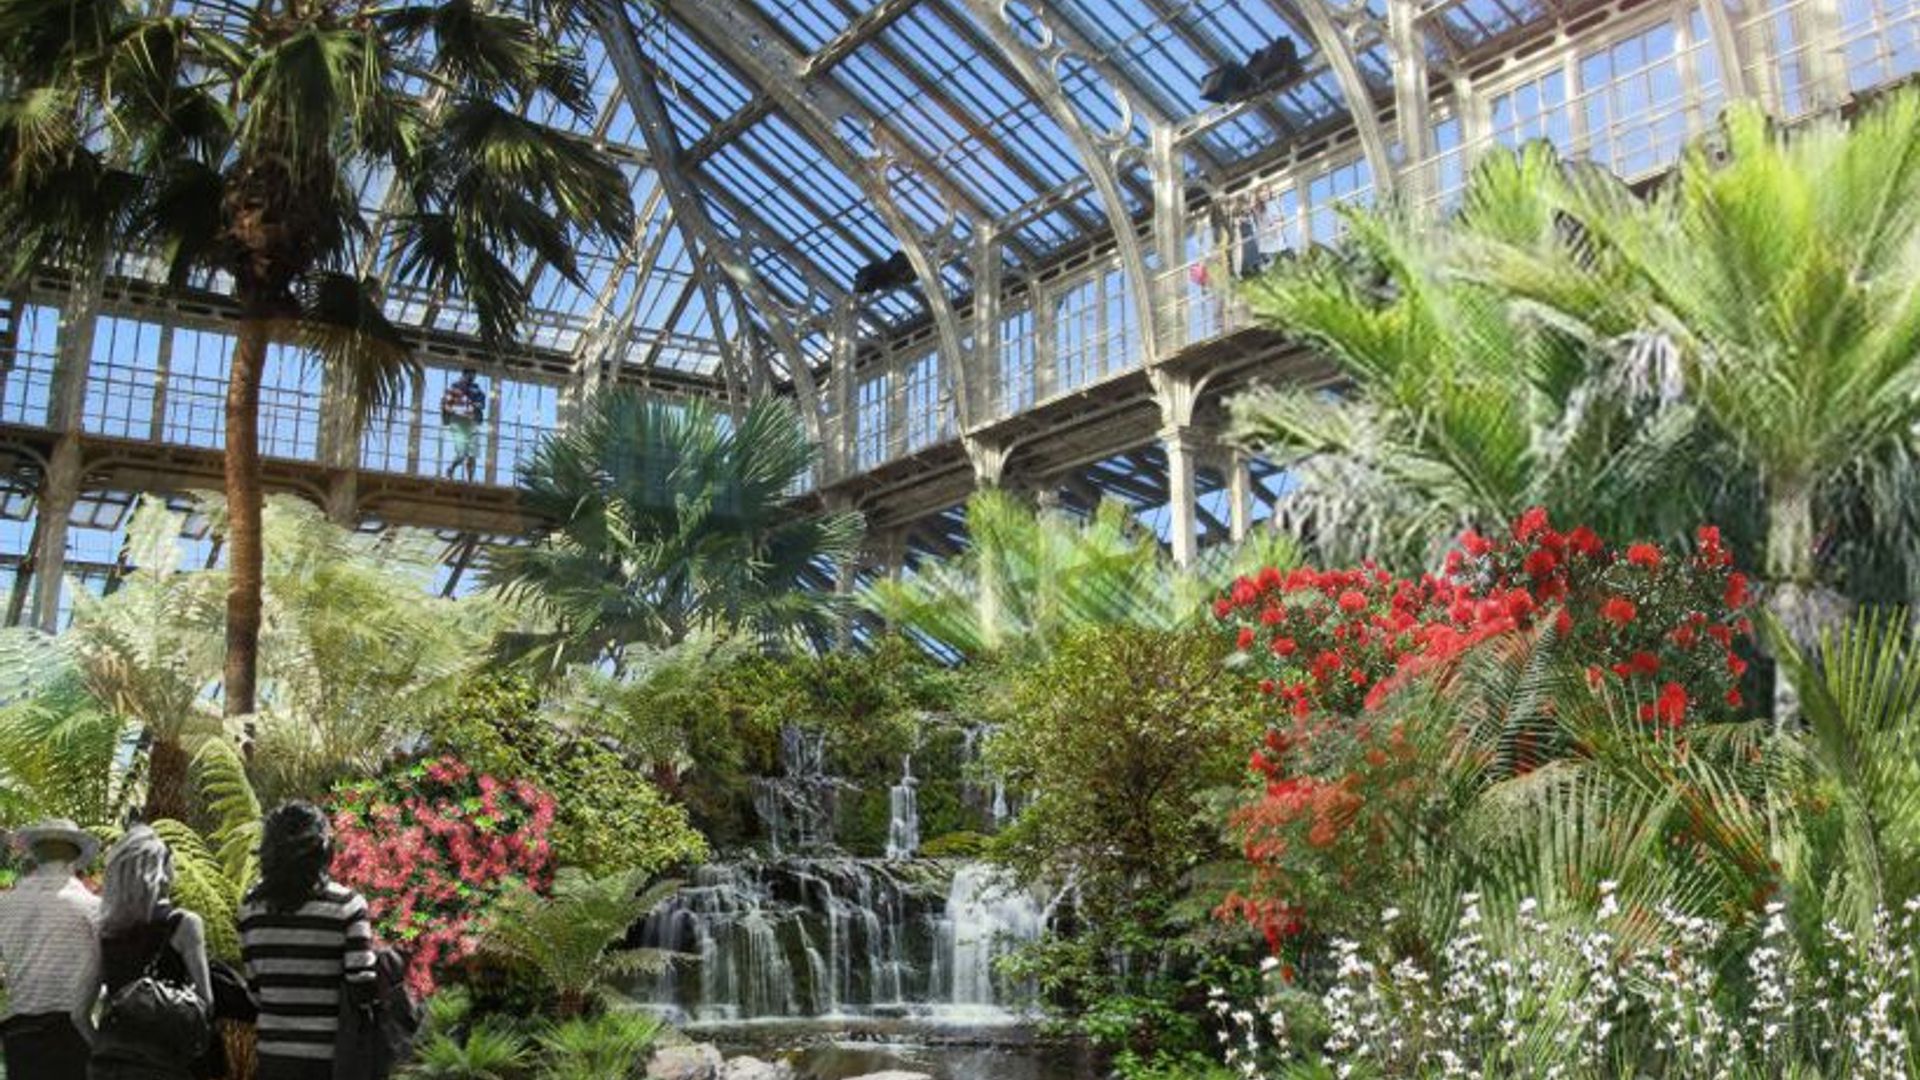 Temperate House Kew artists impression 2